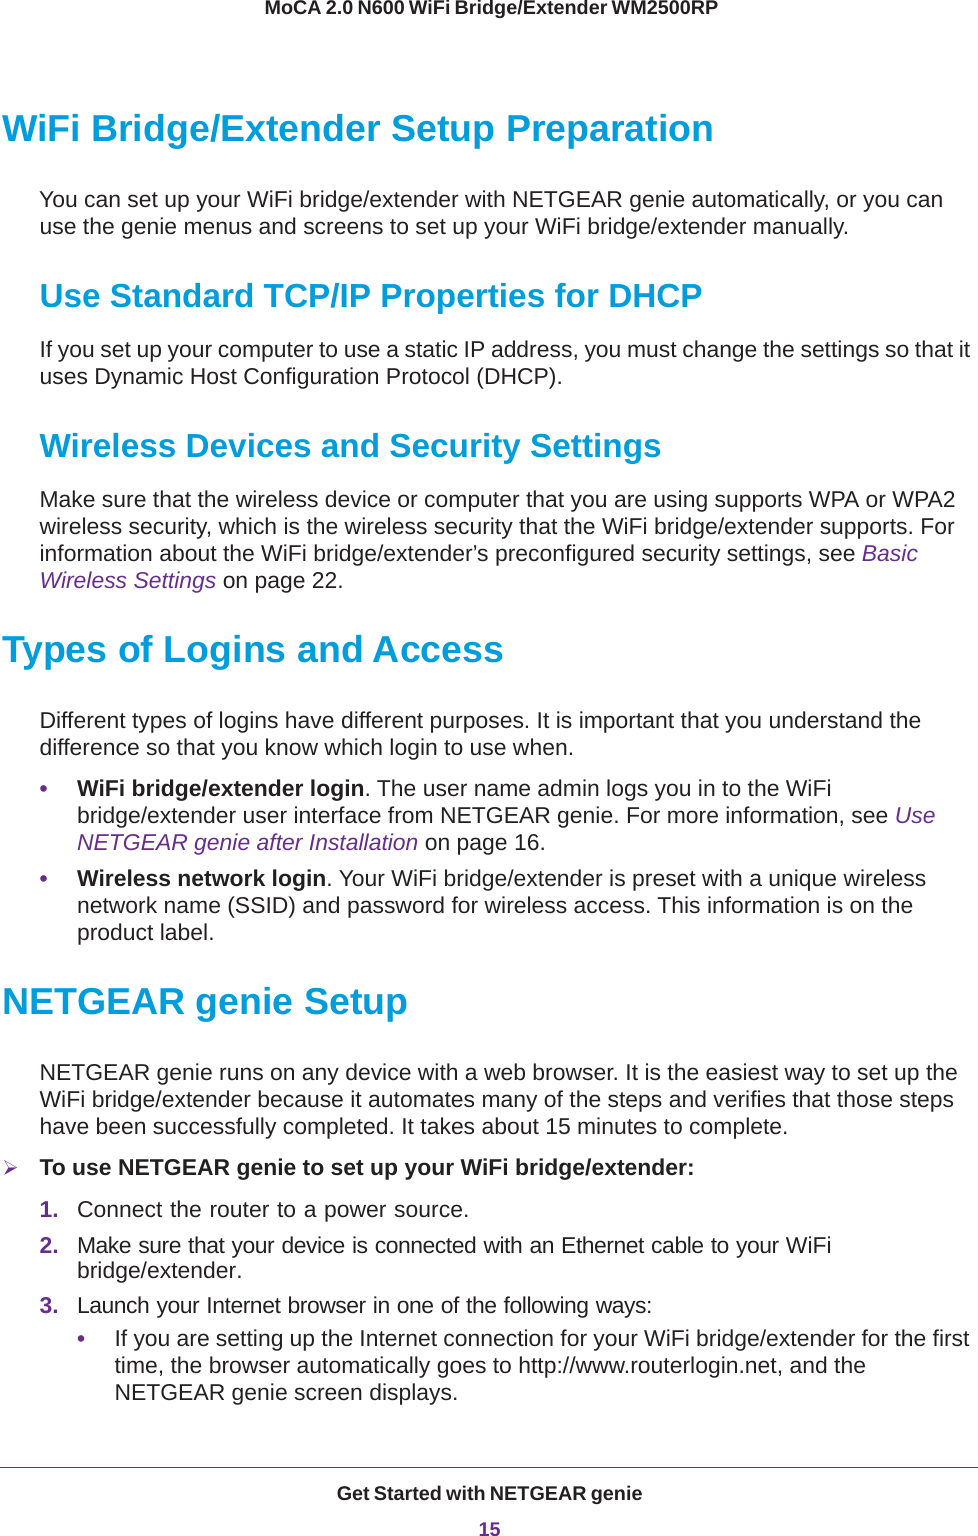 Get Started with NETGEAR genie15 MoCA 2.0 N600 WiFi Bridge/Extender WM2500RPWiFi Bridge/Extender Setup PreparationYou can set up your WiFi bridge/extender with NETGEAR genie automatically, or you can use the genie menus and screens to set up your WiFi bridge/extender manually.Use Standard TCP/IP Properties for DHCPIf you set up your computer to use a static IP address, you must change the settings so that it uses Dynamic Host Configuration Protocol (DHCP). Wireless Devices and Security SettingsMake sure that the wireless device or computer that you are using supports WPA or WPA2 wireless security, which is the wireless security that the WiFi bridge/extender supports. For information about the WiFi bridge/extender’s preconfigured security settings, see Basic Wireless Settings on page  22.Types of Logins and AccessDifferent types of logins have different purposes. It is important that you understand the difference so that you know which login to use when.•WiFi bridge/extender login. The user name admin logs you in to the WiFi bridge/extender user interface from NETGEAR genie. For more information, see Use NETGEAR genie after Installation on page  16.•Wireless network login. Your WiFi bridge/extender is preset with a unique wireless network name (SSID) and password for wireless access. This information is on the product label.NETGEAR genie SetupNETGEAR genie runs on any device with a web browser. It is the easiest way to set up the WiFi bridge/extender because it automates many of the steps and verifies that those steps have been successfully completed. It takes about 15  minutes to complete. To use NETGEAR genie to set up your WiFi bridge/extender:1. Connect the router to a power source.2. Make sure that your device is connected with an Ethernet cable to your WiFi bridge/extender.3. Launch your Internet browser in one of the following ways:•If you are setting up the Internet connection for your WiFi bridge/extender for the first time, the browser automatically goes to http://www.routerlogin.net, and the NETGEAR genie screen displays.